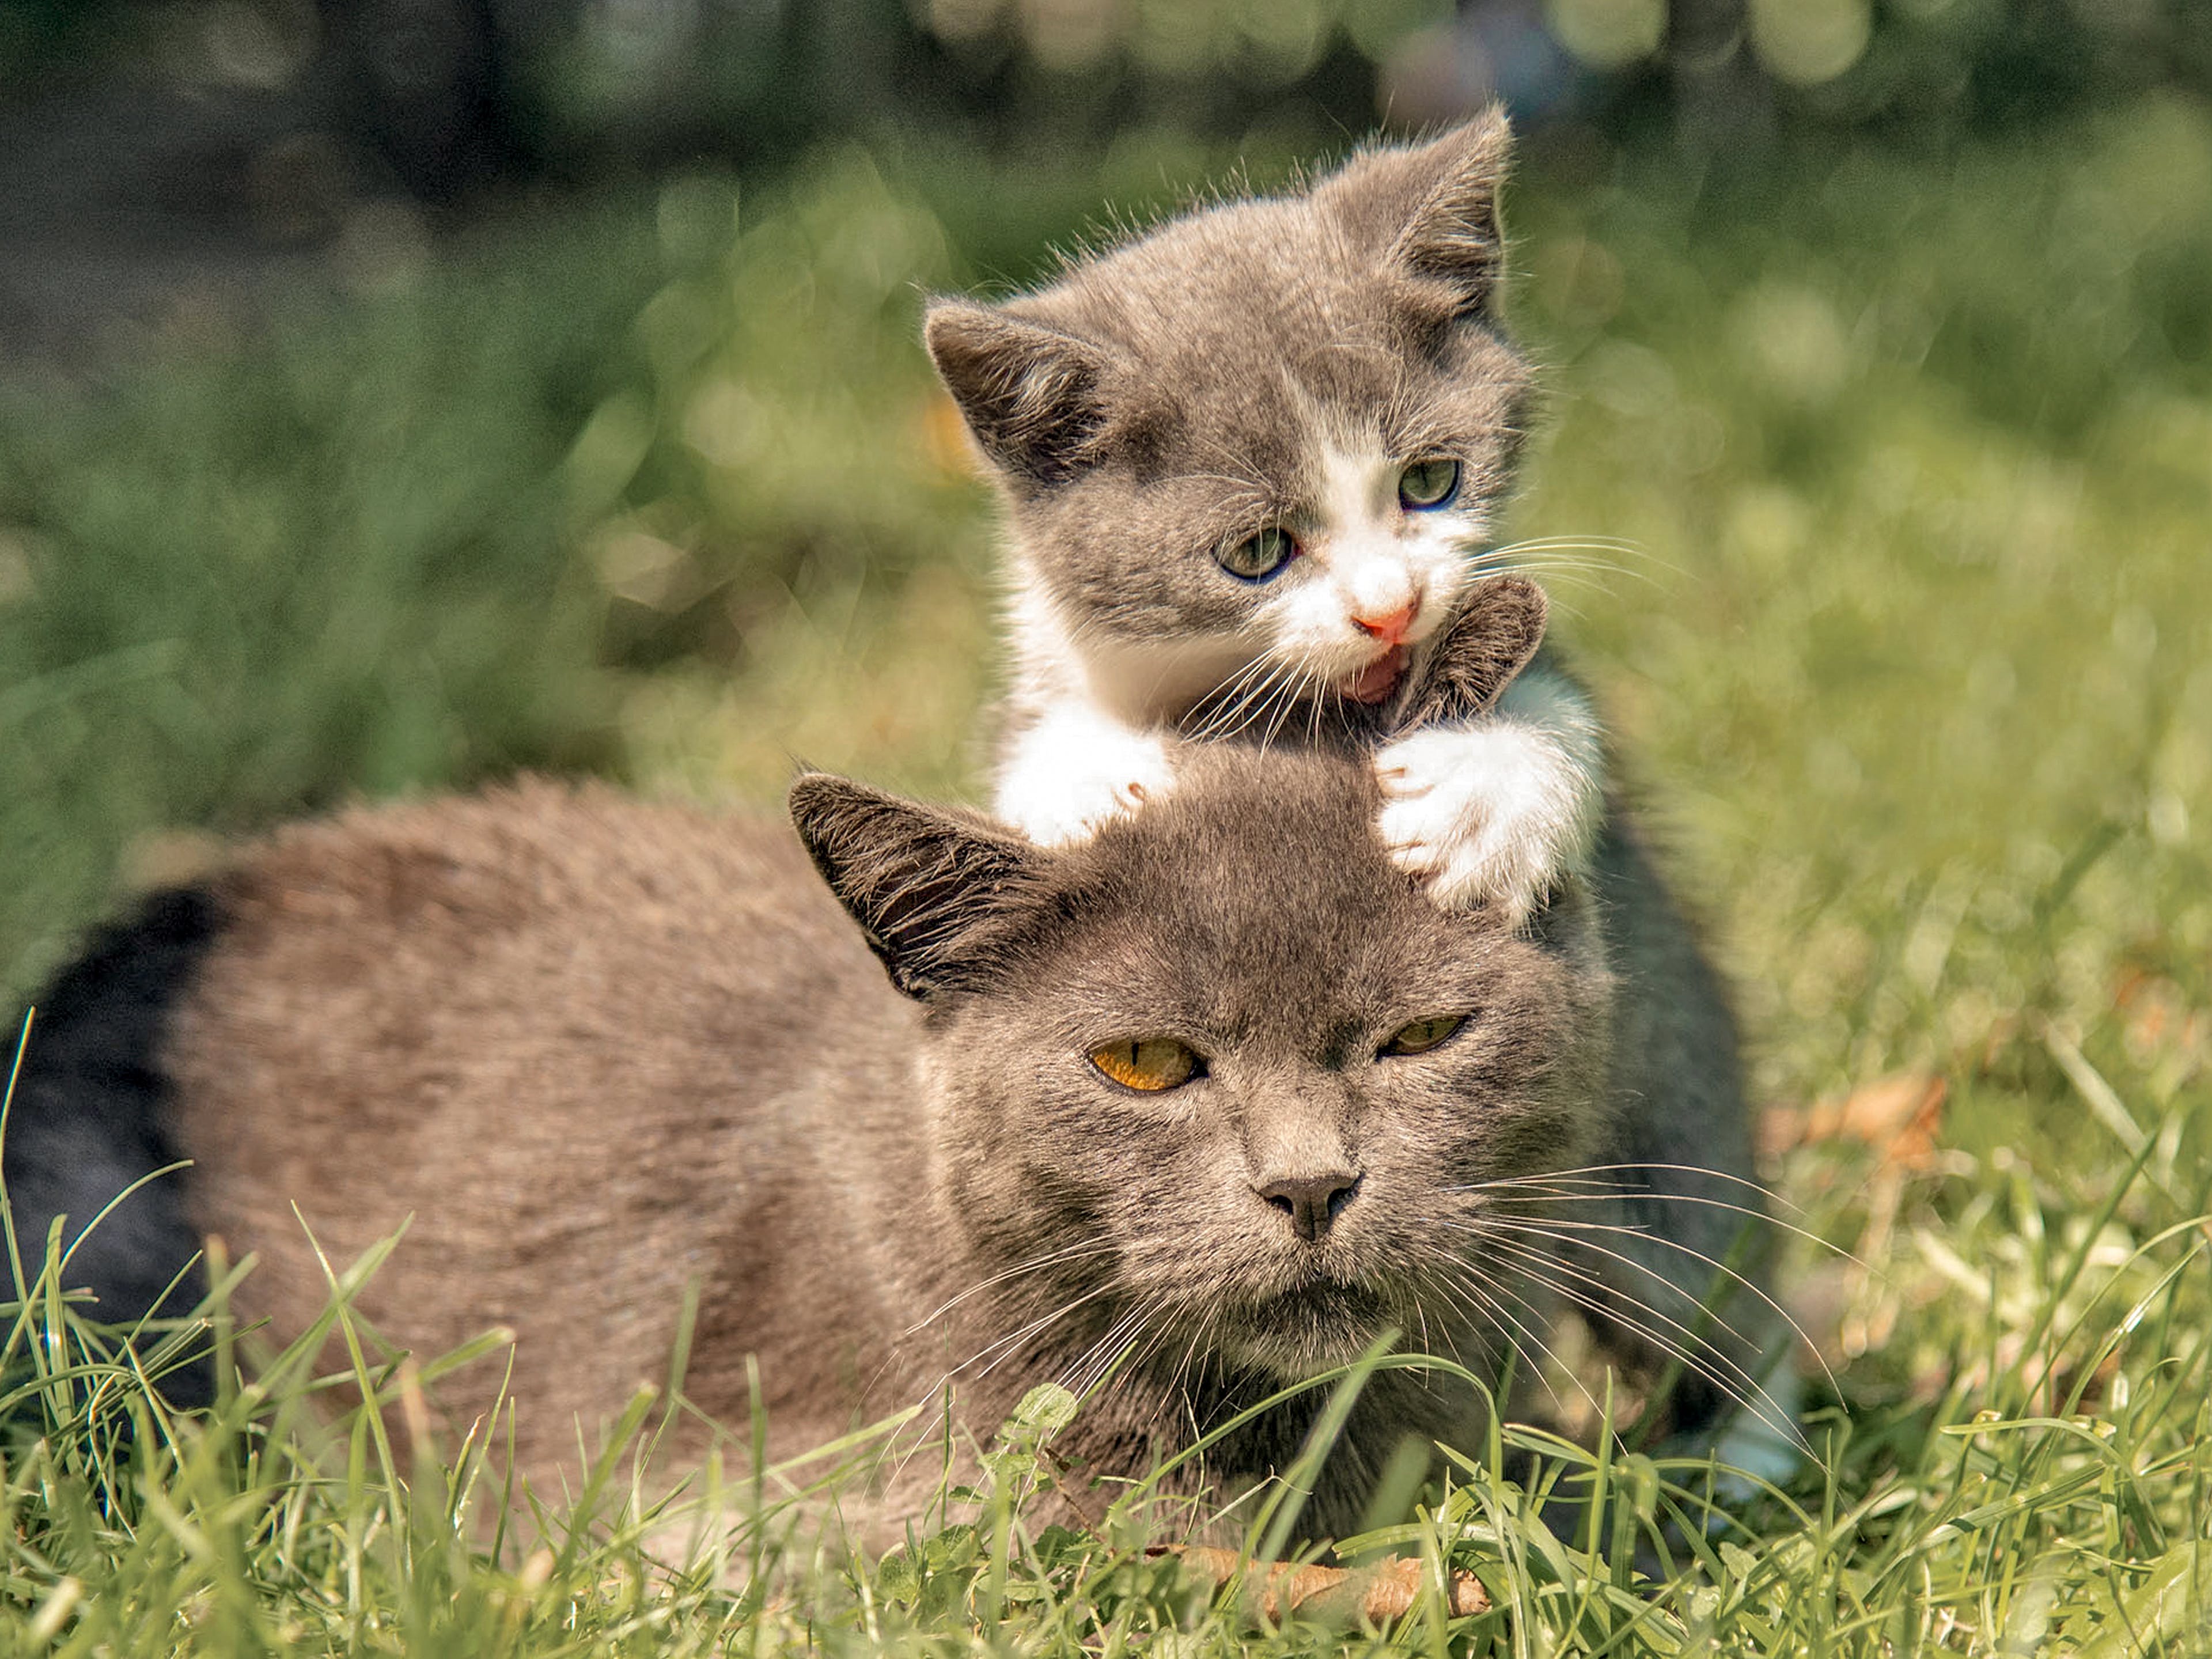 Mother and kitten playing together outside in grass